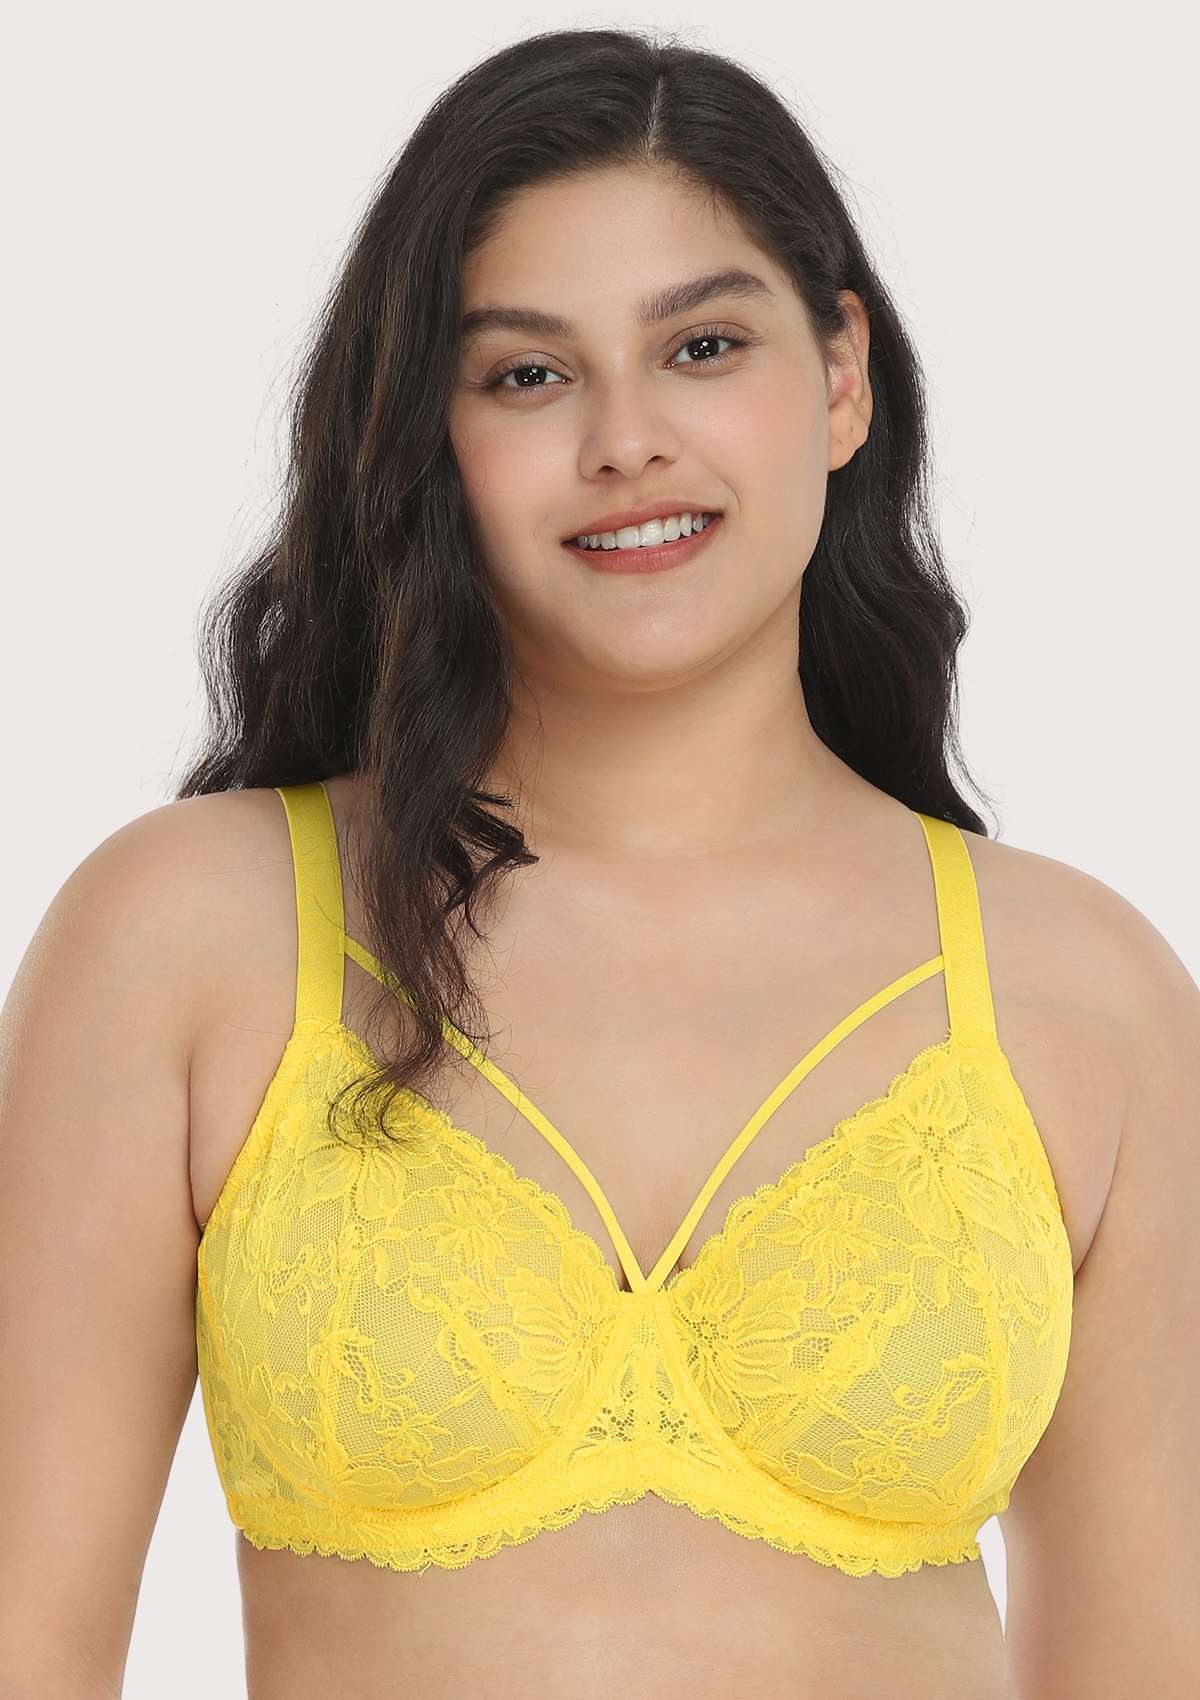 HSIA Unlined Lace Mesh Minimizer Bra For Large Breasts, Full Coverage - Bright Green / 46 / DDD/F